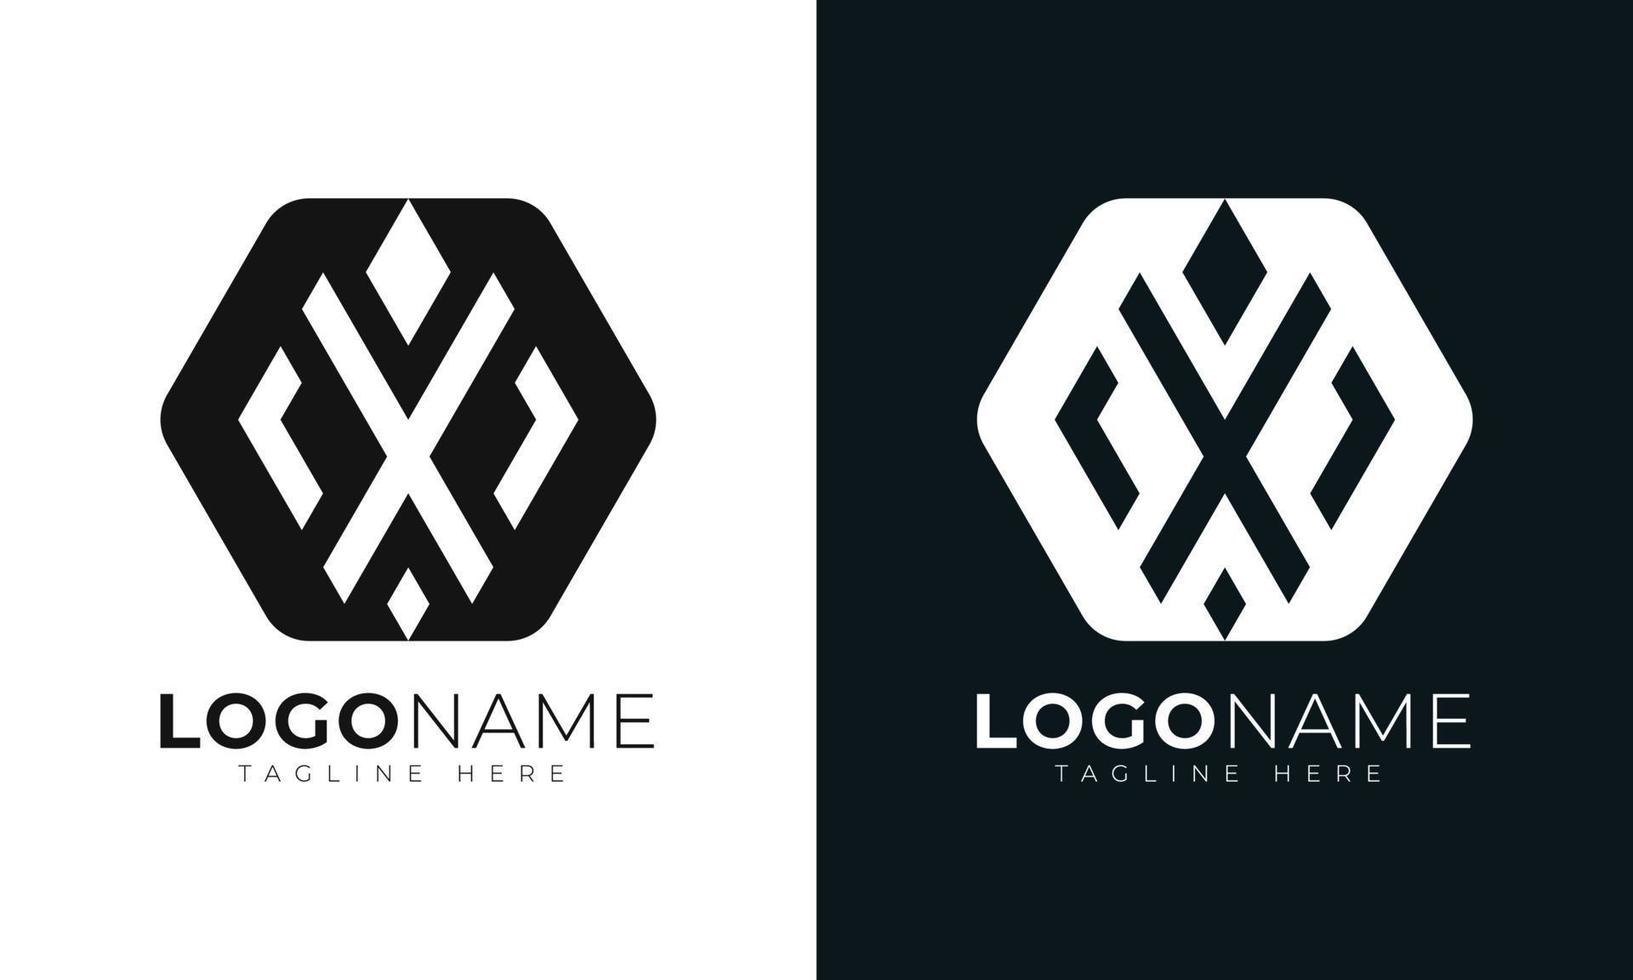 Initial letter x logo vector design template. With Hexagonal shape. Polygonal style.